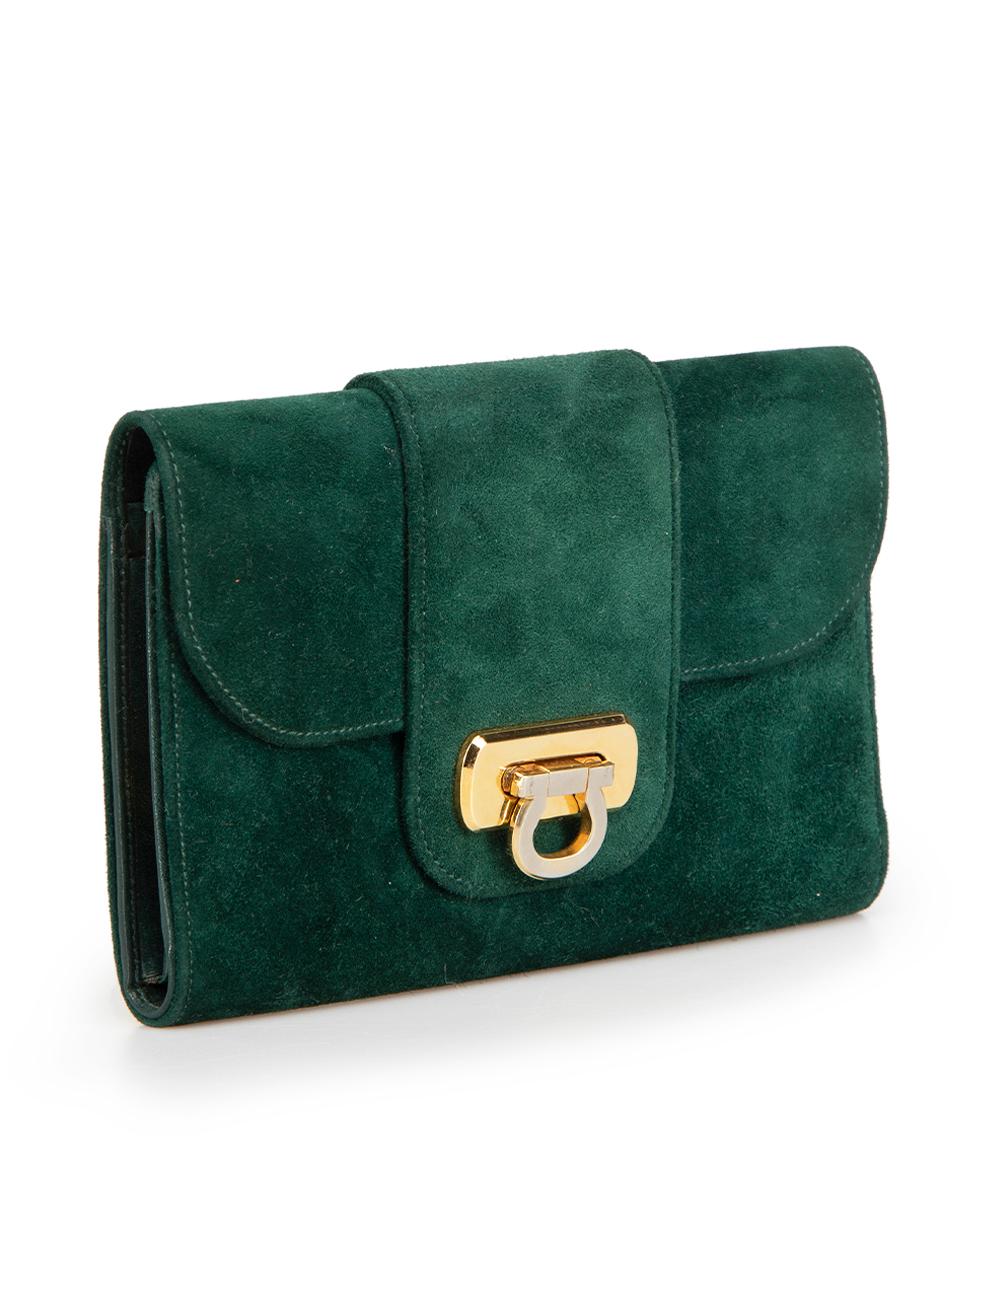 CONDITION is Very good. Minor tarnishing and scratching along exterior hardware. Minimal wear to this Salvatore Ferragamo designer resale item.



Details


Dark green

Suede

Wallet

Front flap clasp closure

4x Internal slip pockets

1x Coin